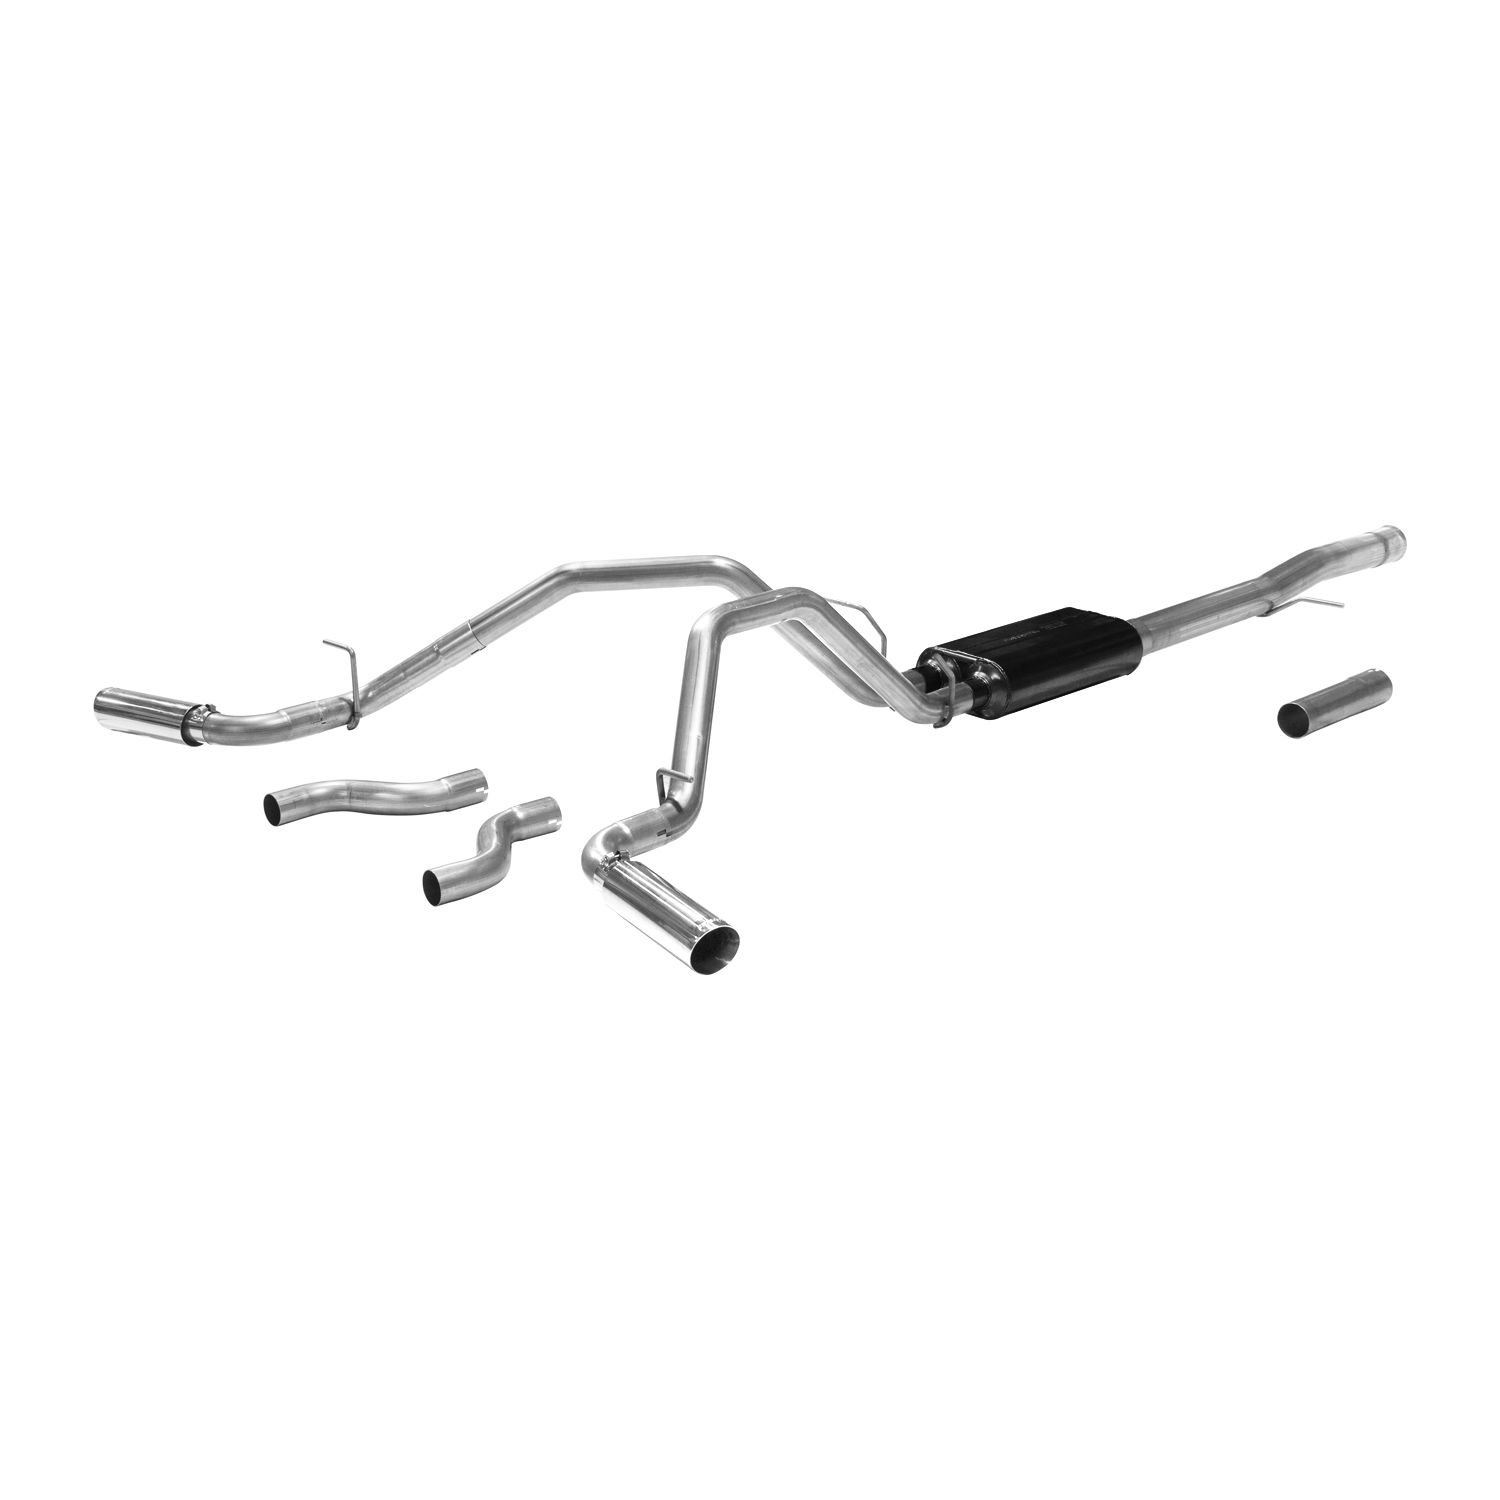 2011-2013 GMC Sierra 1500 SLE 6.2L Crew Cab/EXT Cab Flowmaster American Thunder Cat-Back Exhaust 69.3 inch Bed